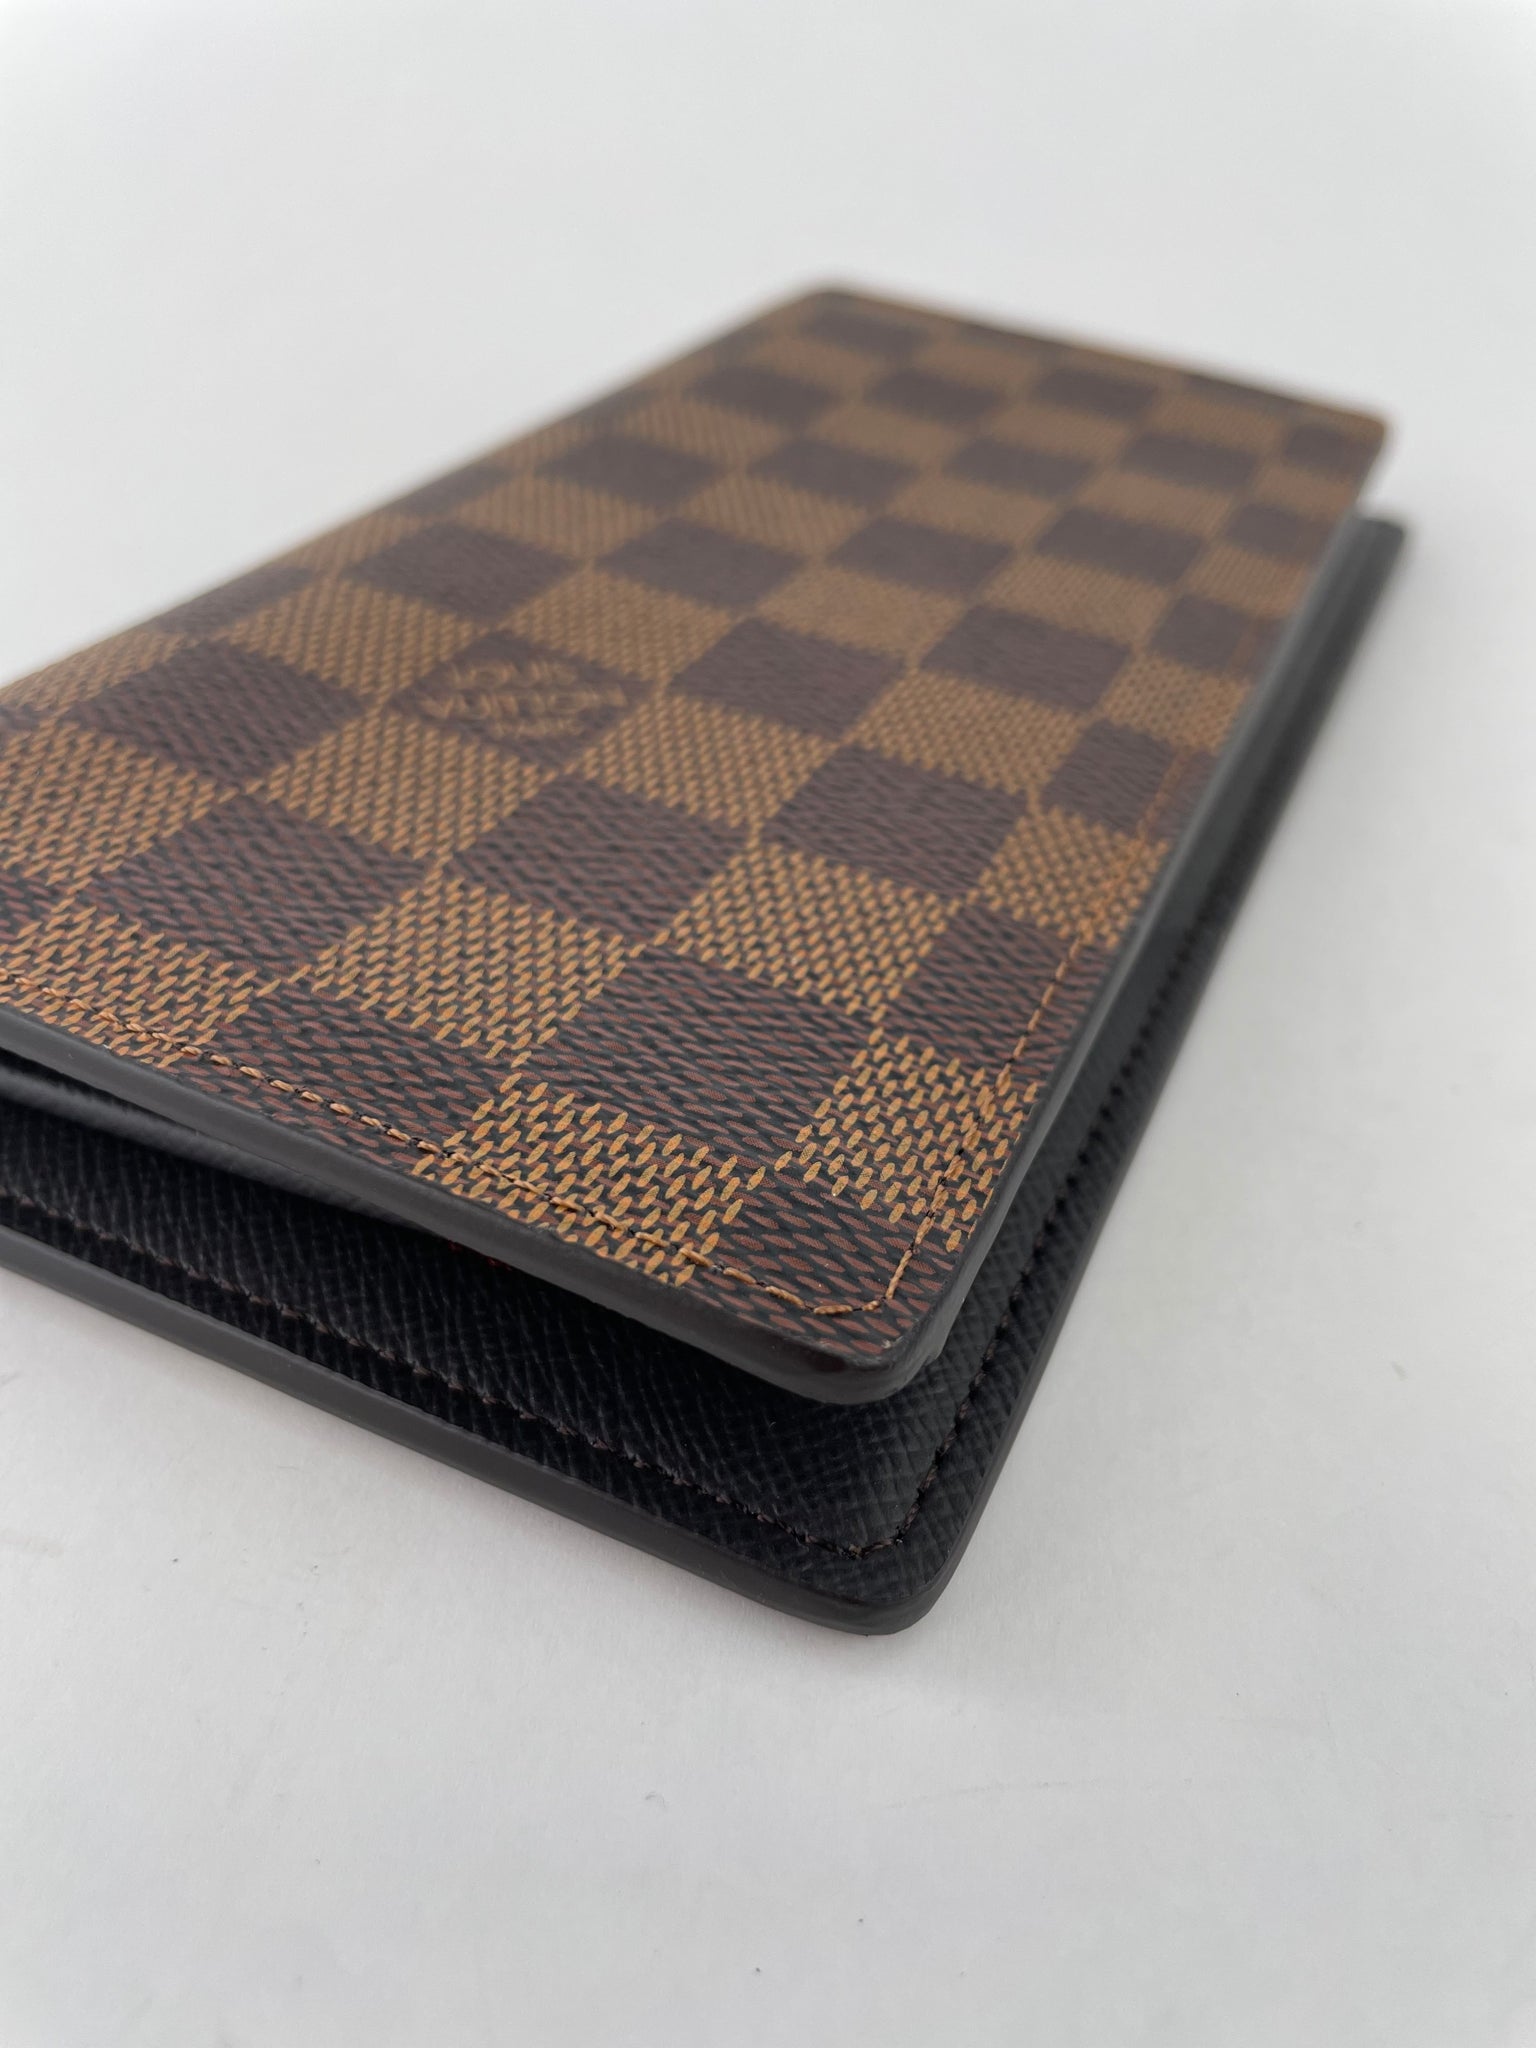 Buy Louis Vuitton LOUISVUITTON Size:- M30889 Portefeuille Brazza NM  Monogram/Tigarama Long Wallet Wallet from Japan - Buy authentic Plus  exclusive items from Japan